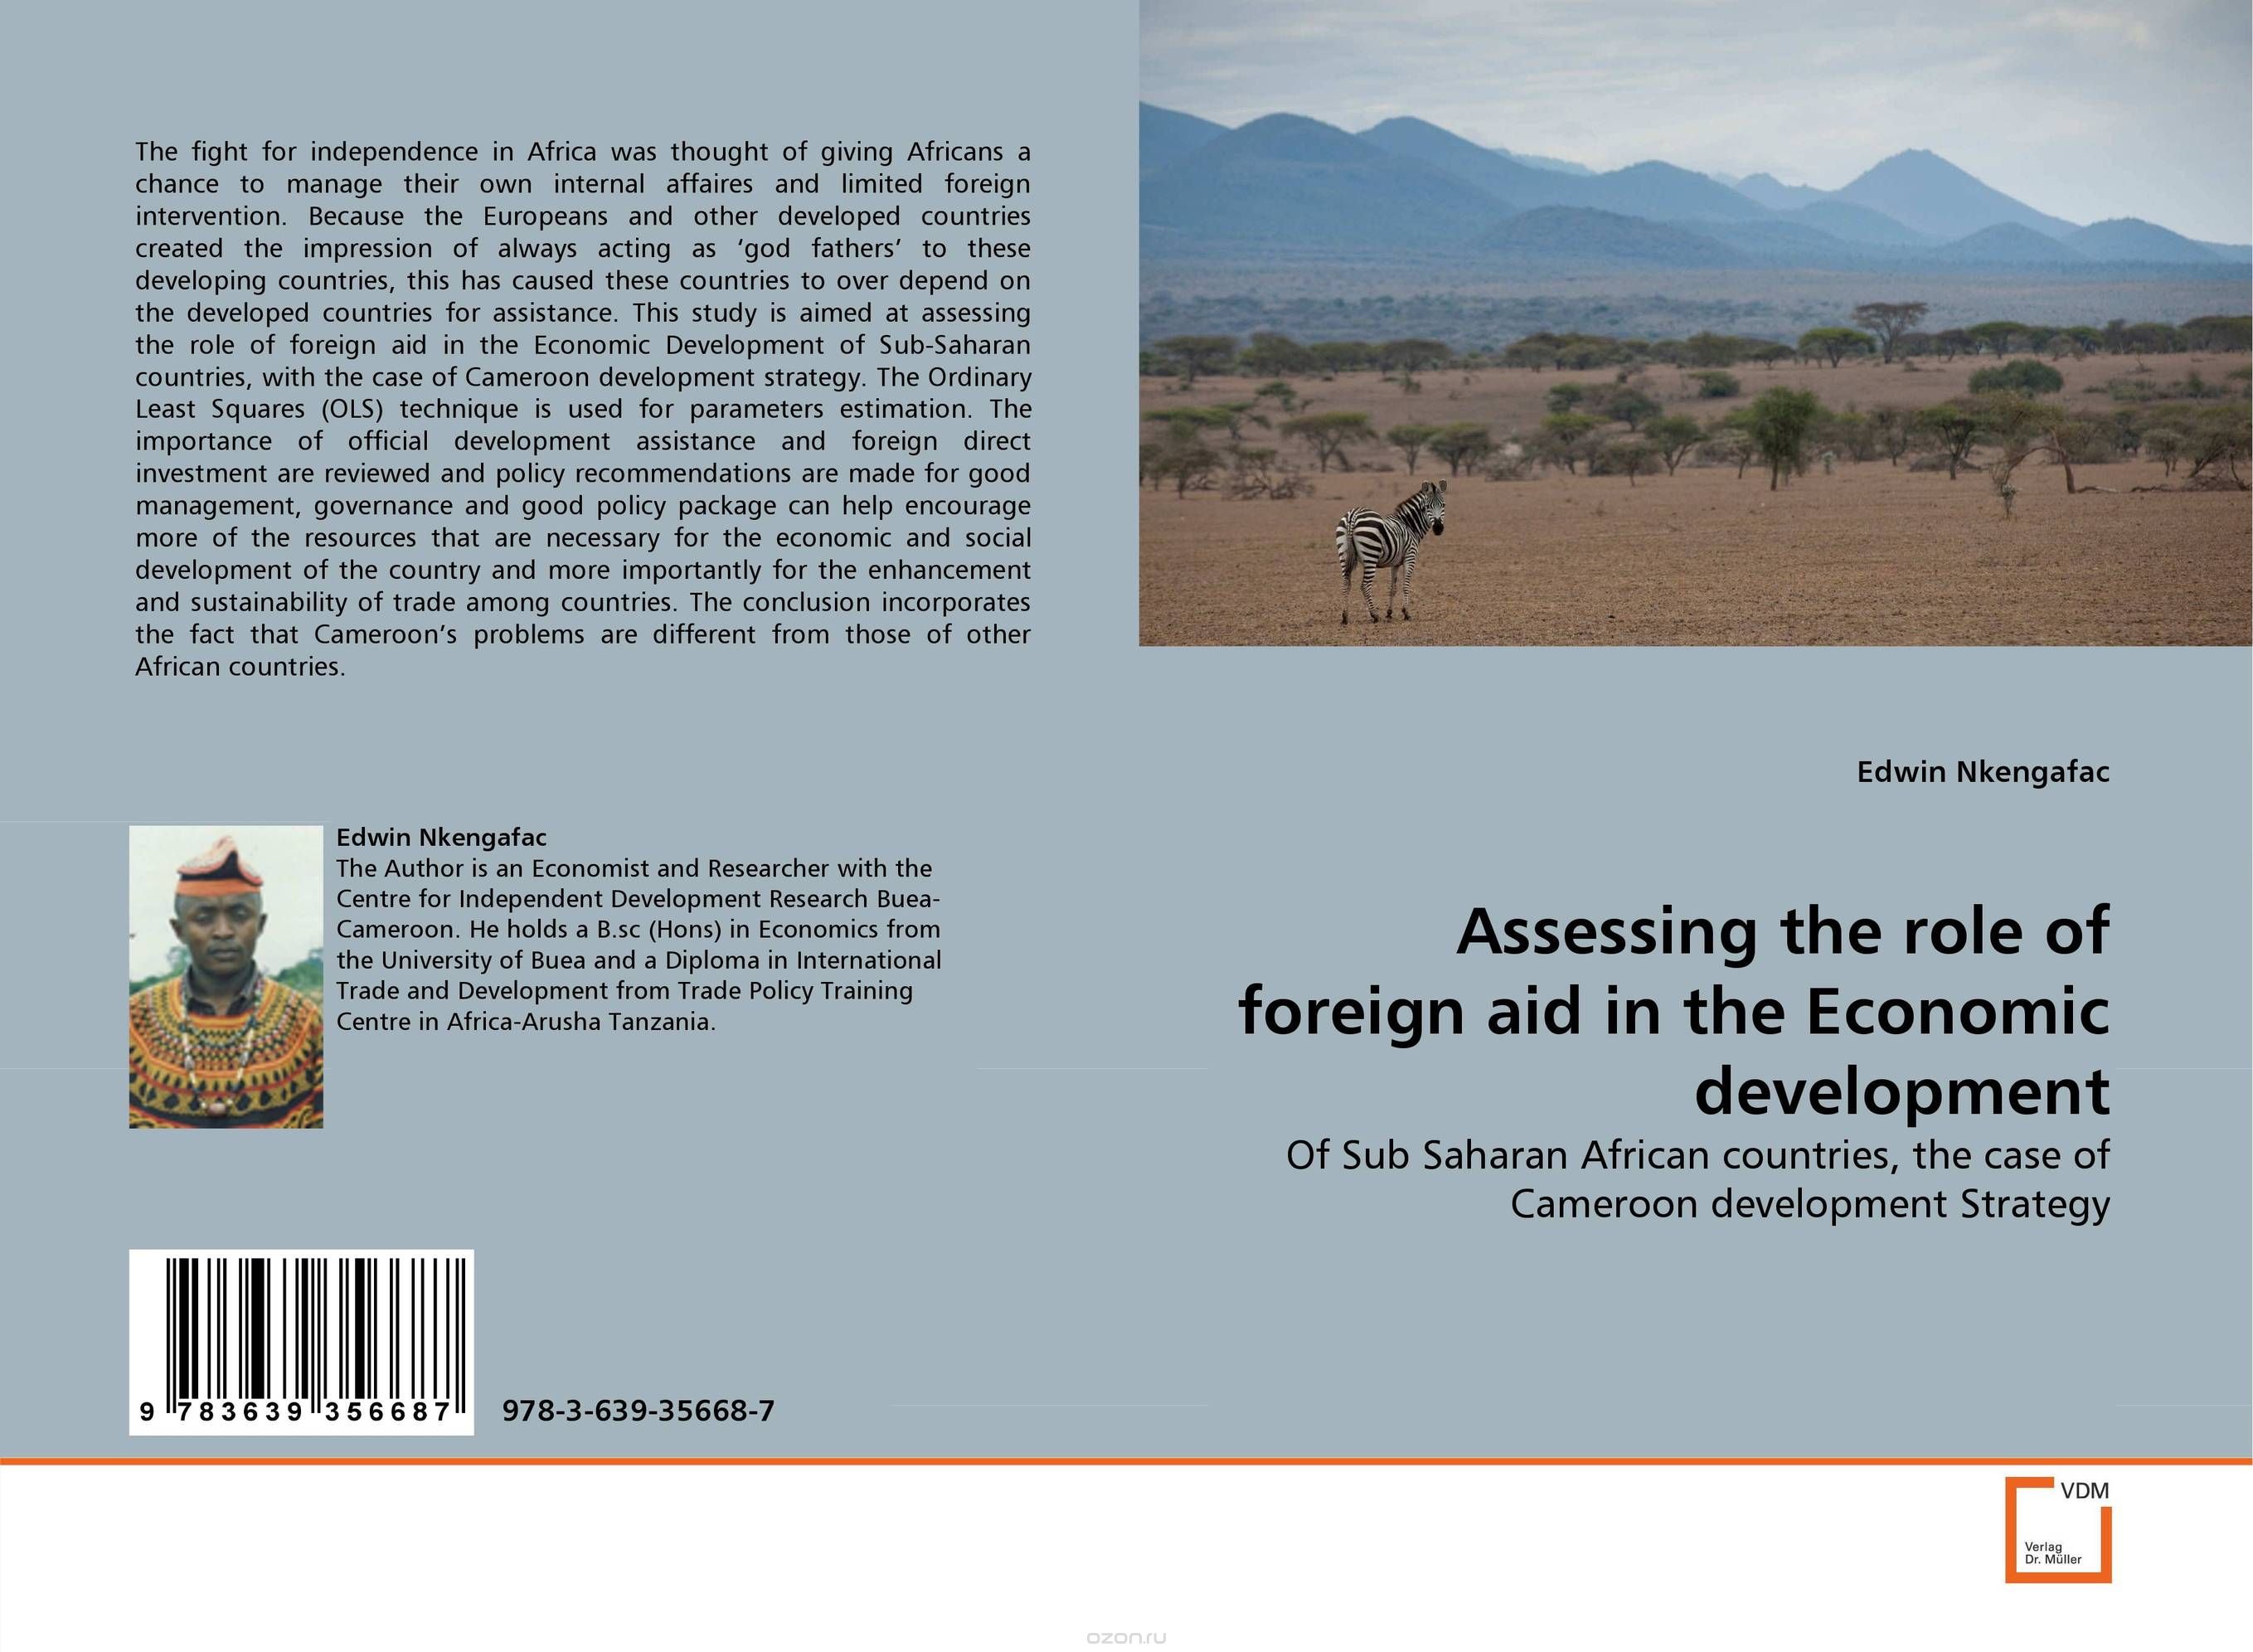 Скачать книгу "Assessing the role of foreign aid in the Economic development"